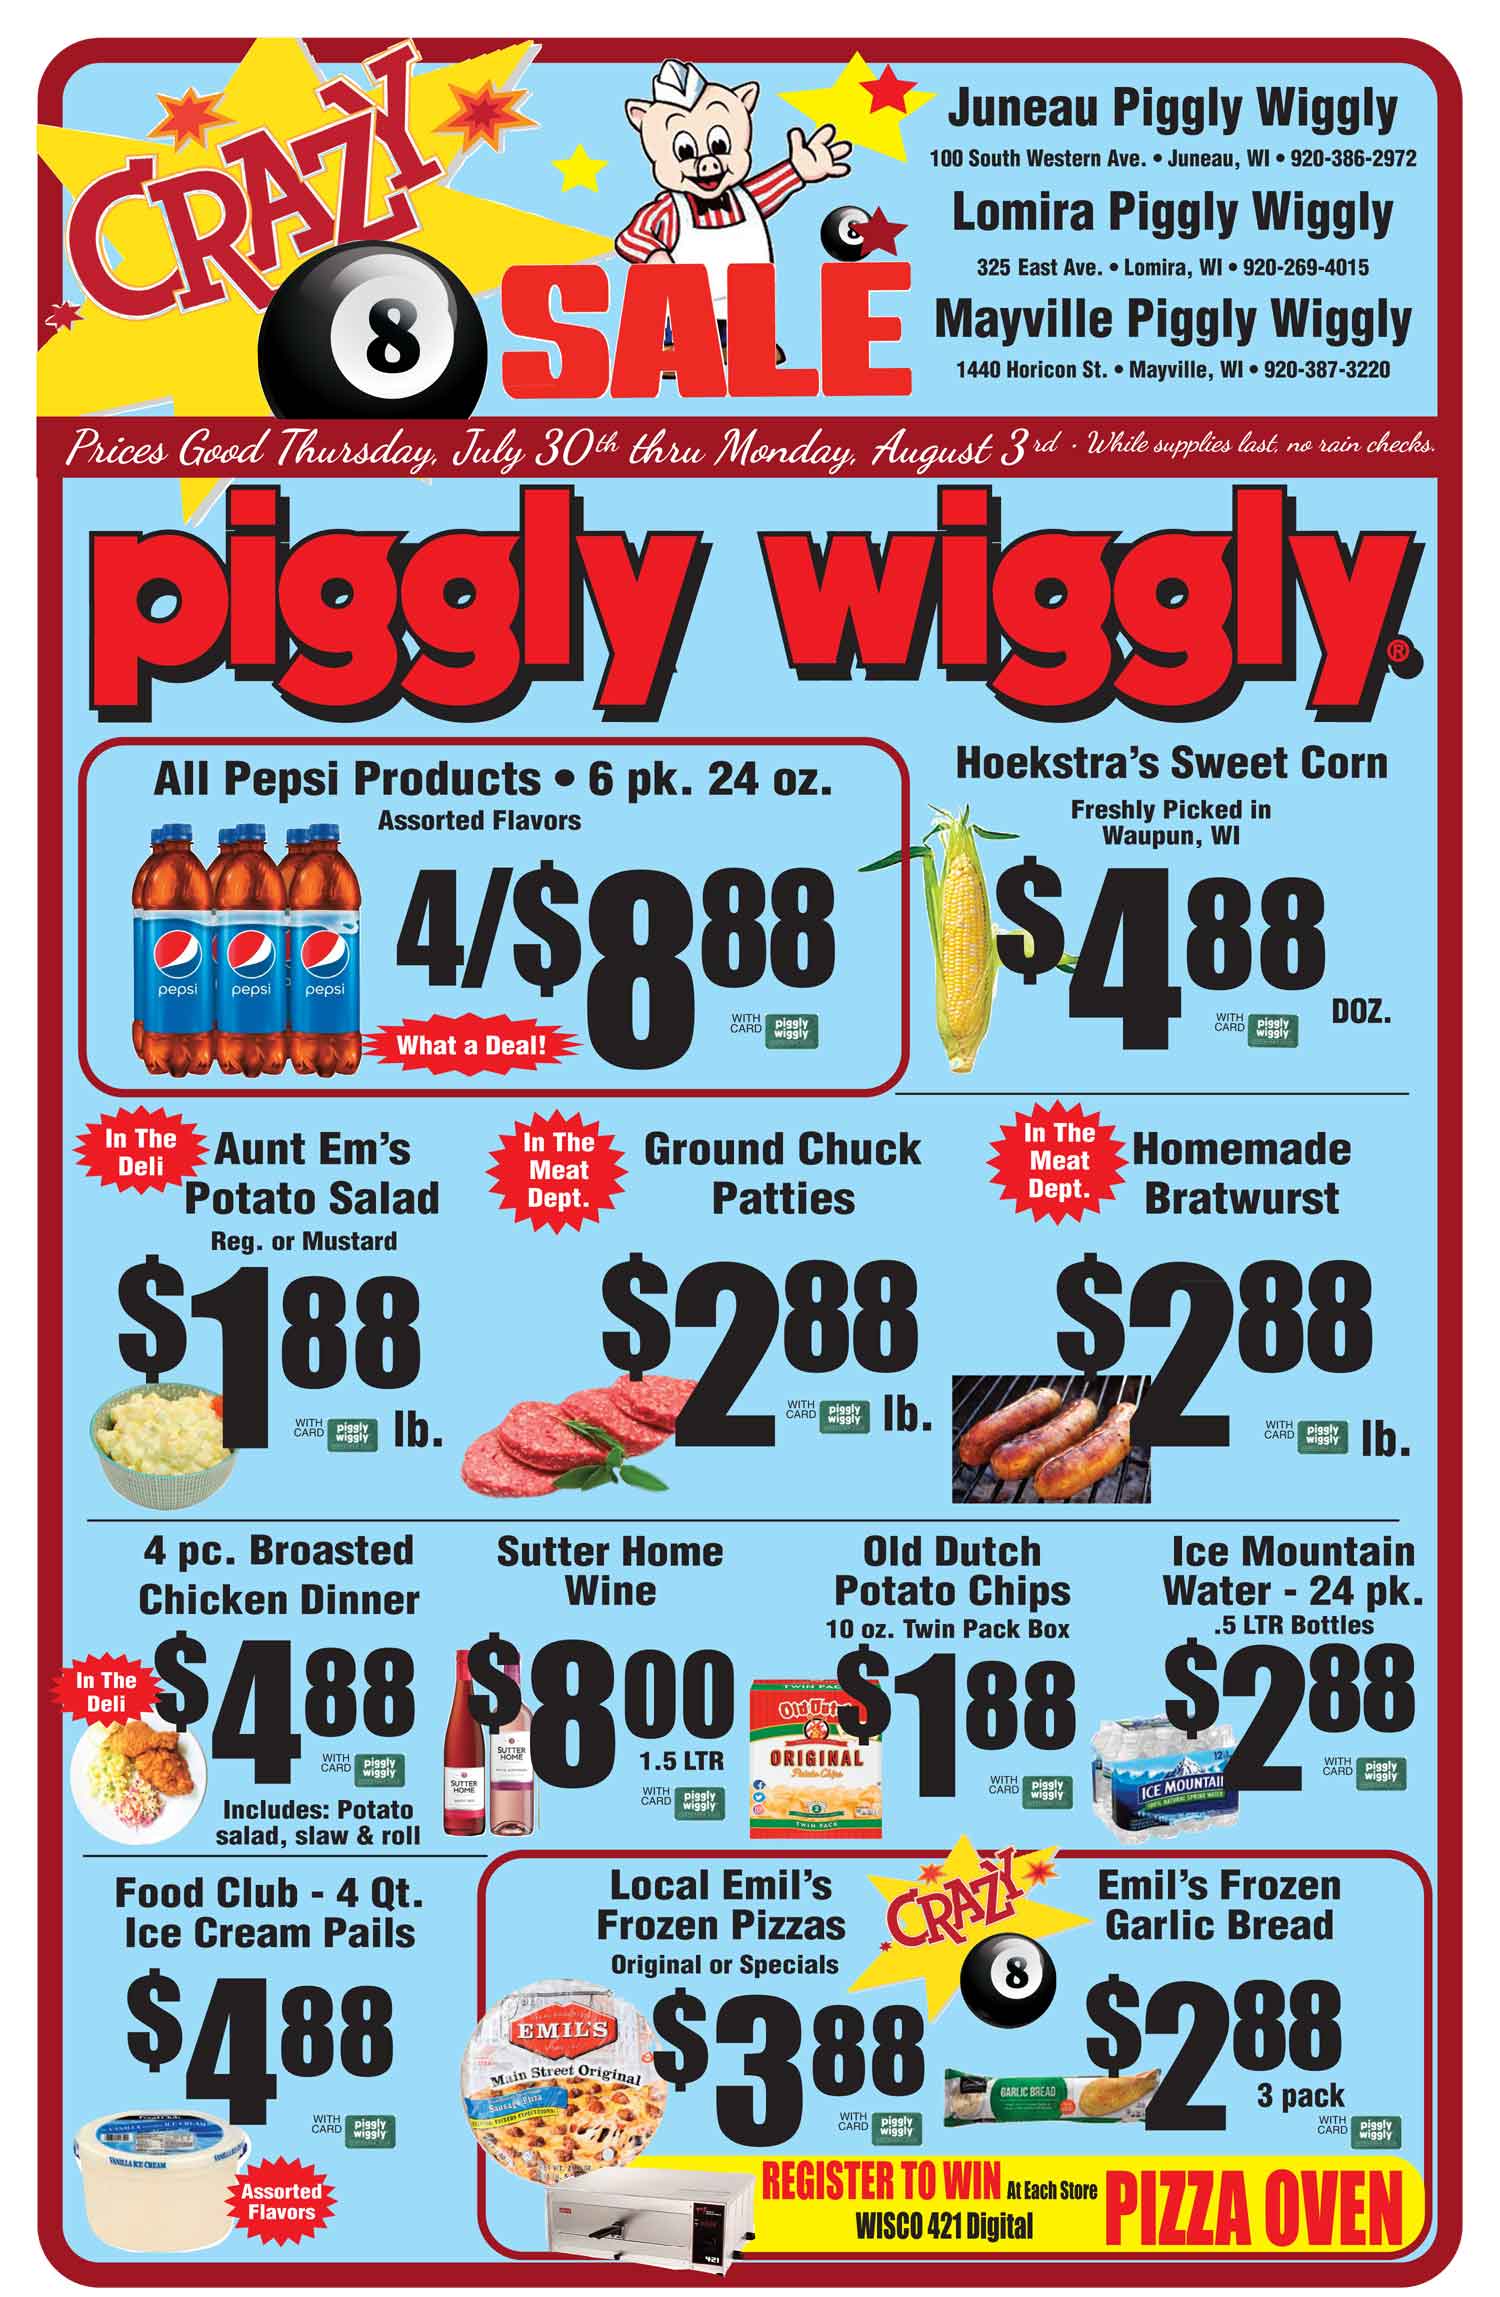 piggly wiggly ads